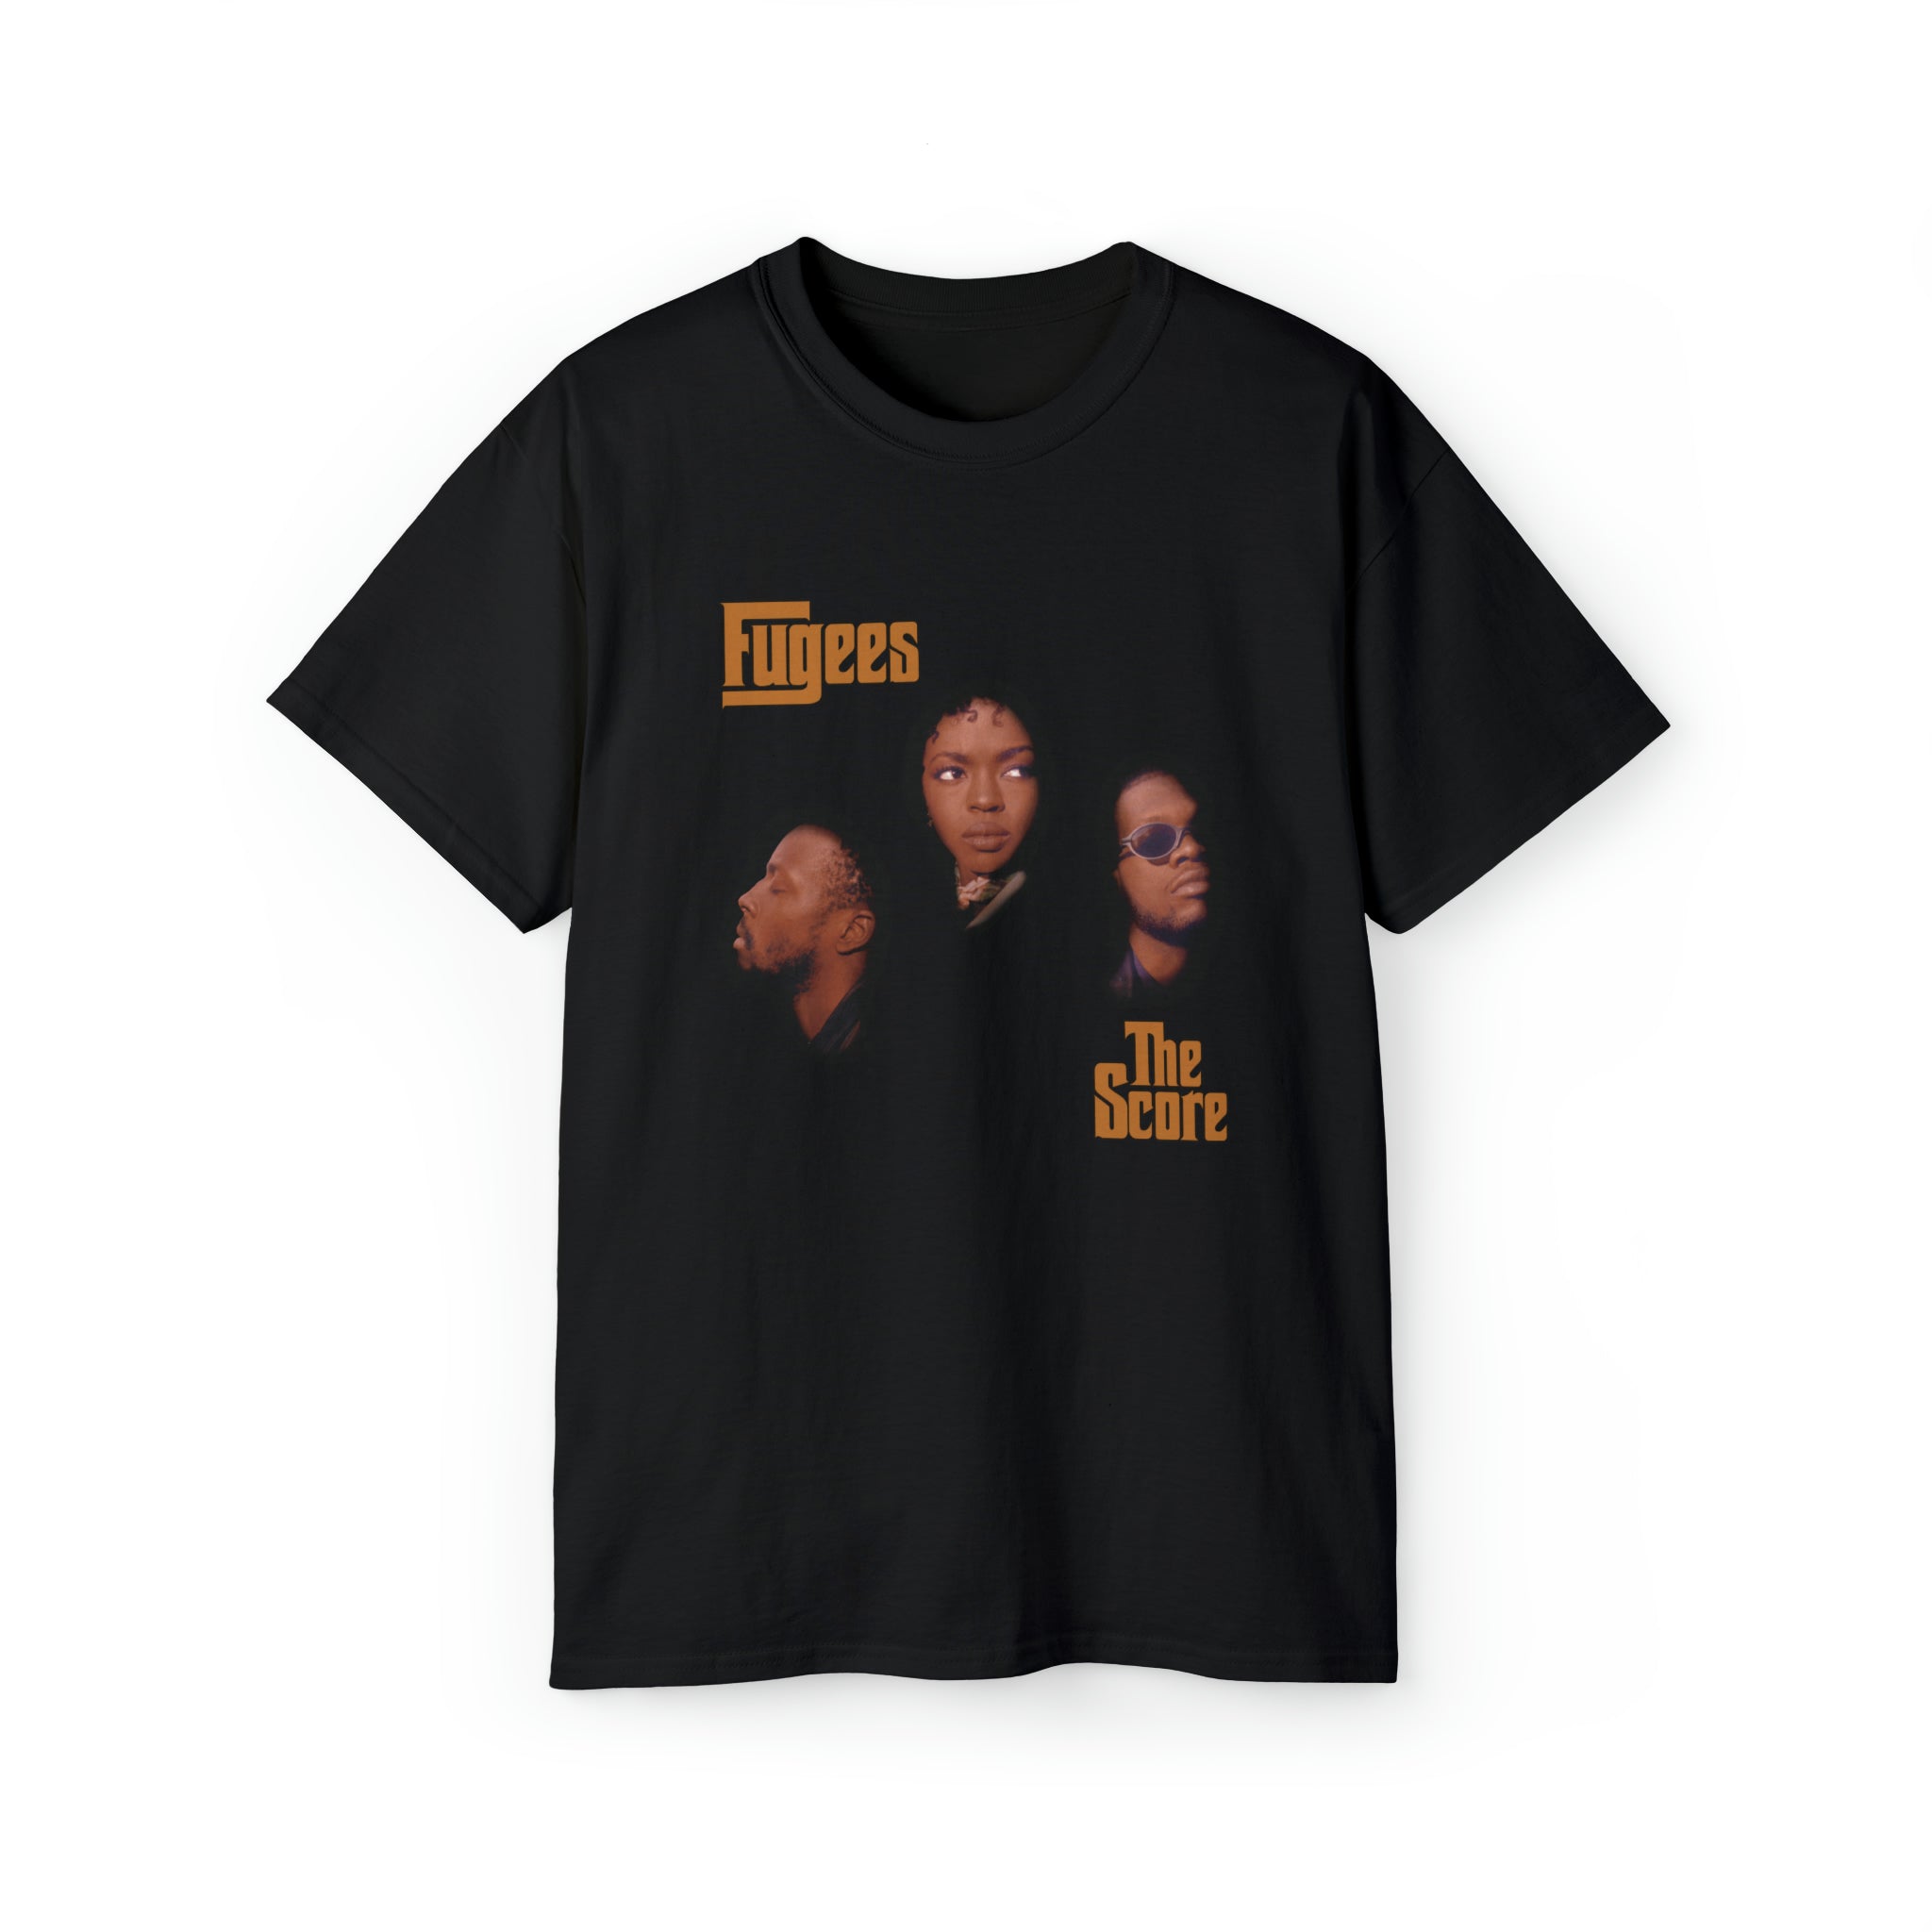 Fugees 'The Score' 90s Hip Hop Tee - Lauryn Hill